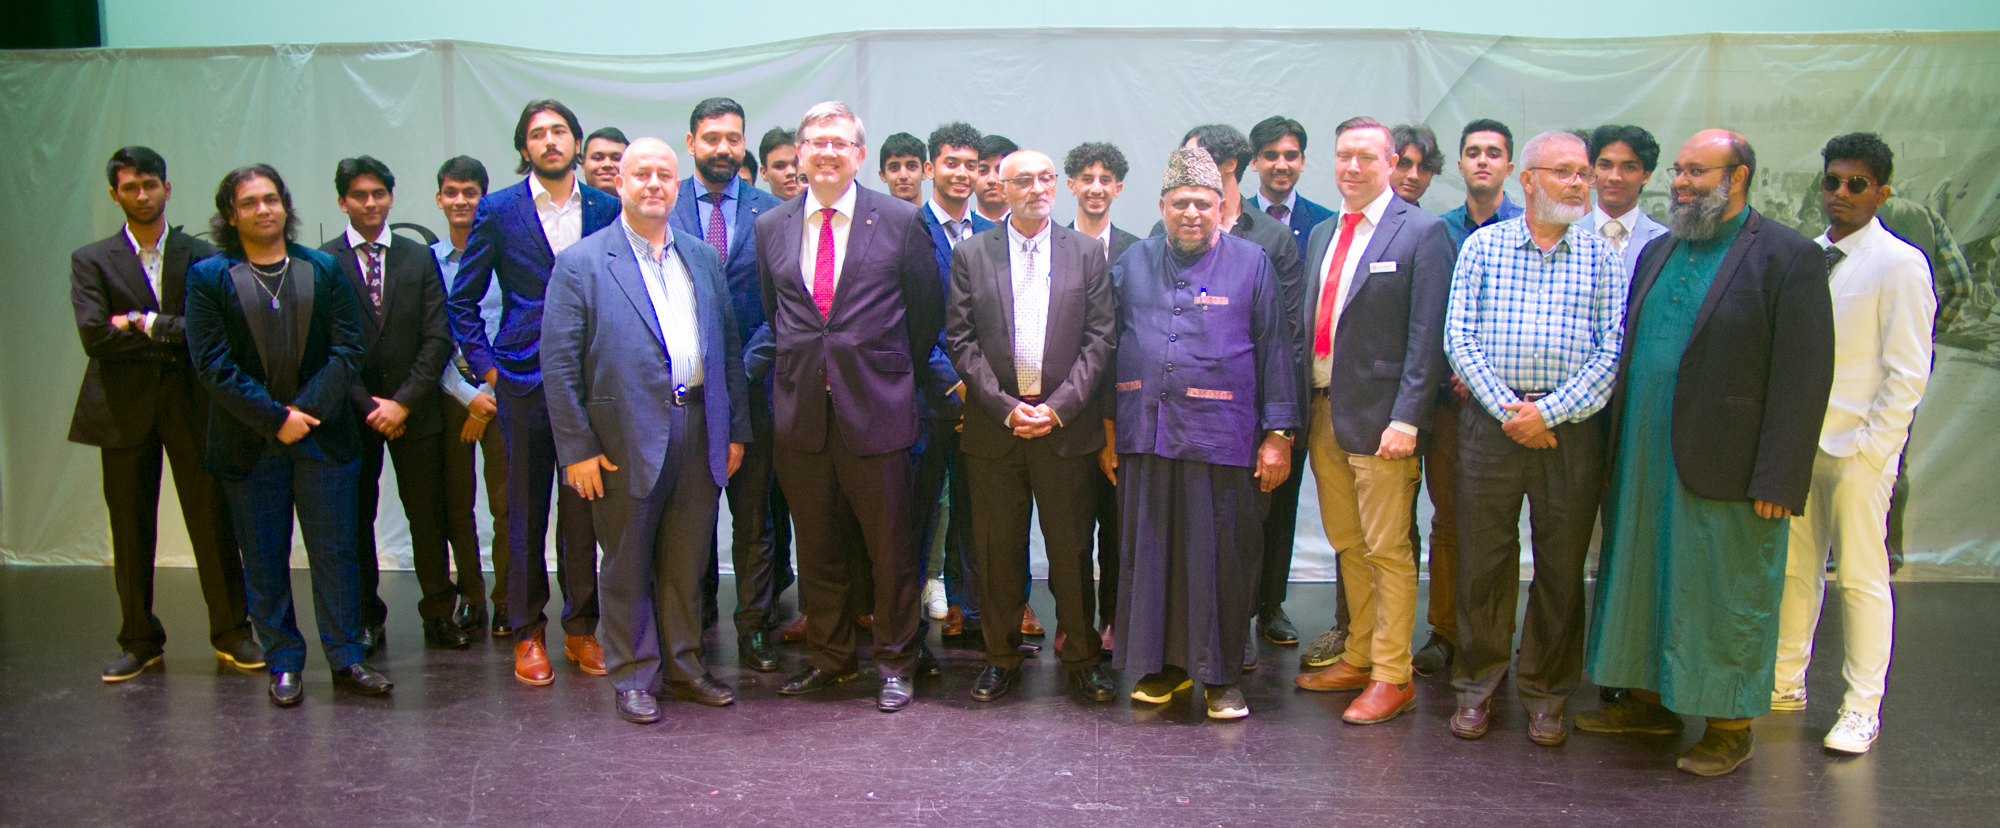 HAA Year 12 Muslim Achievement Award Recipients 2022 Along With Human Appeal’s Team And Guests In Brisbane